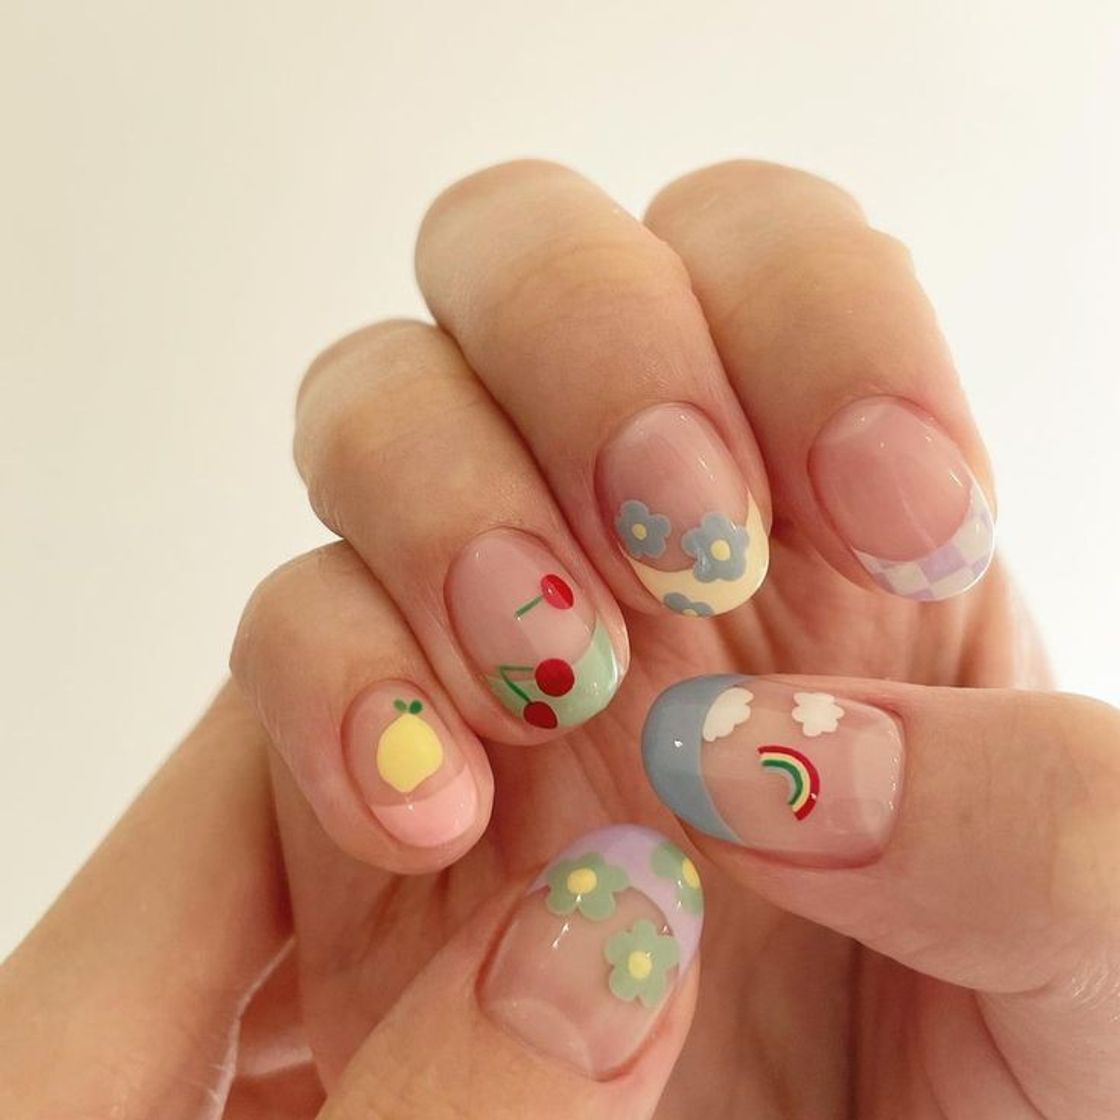 Cute Nails Decorated